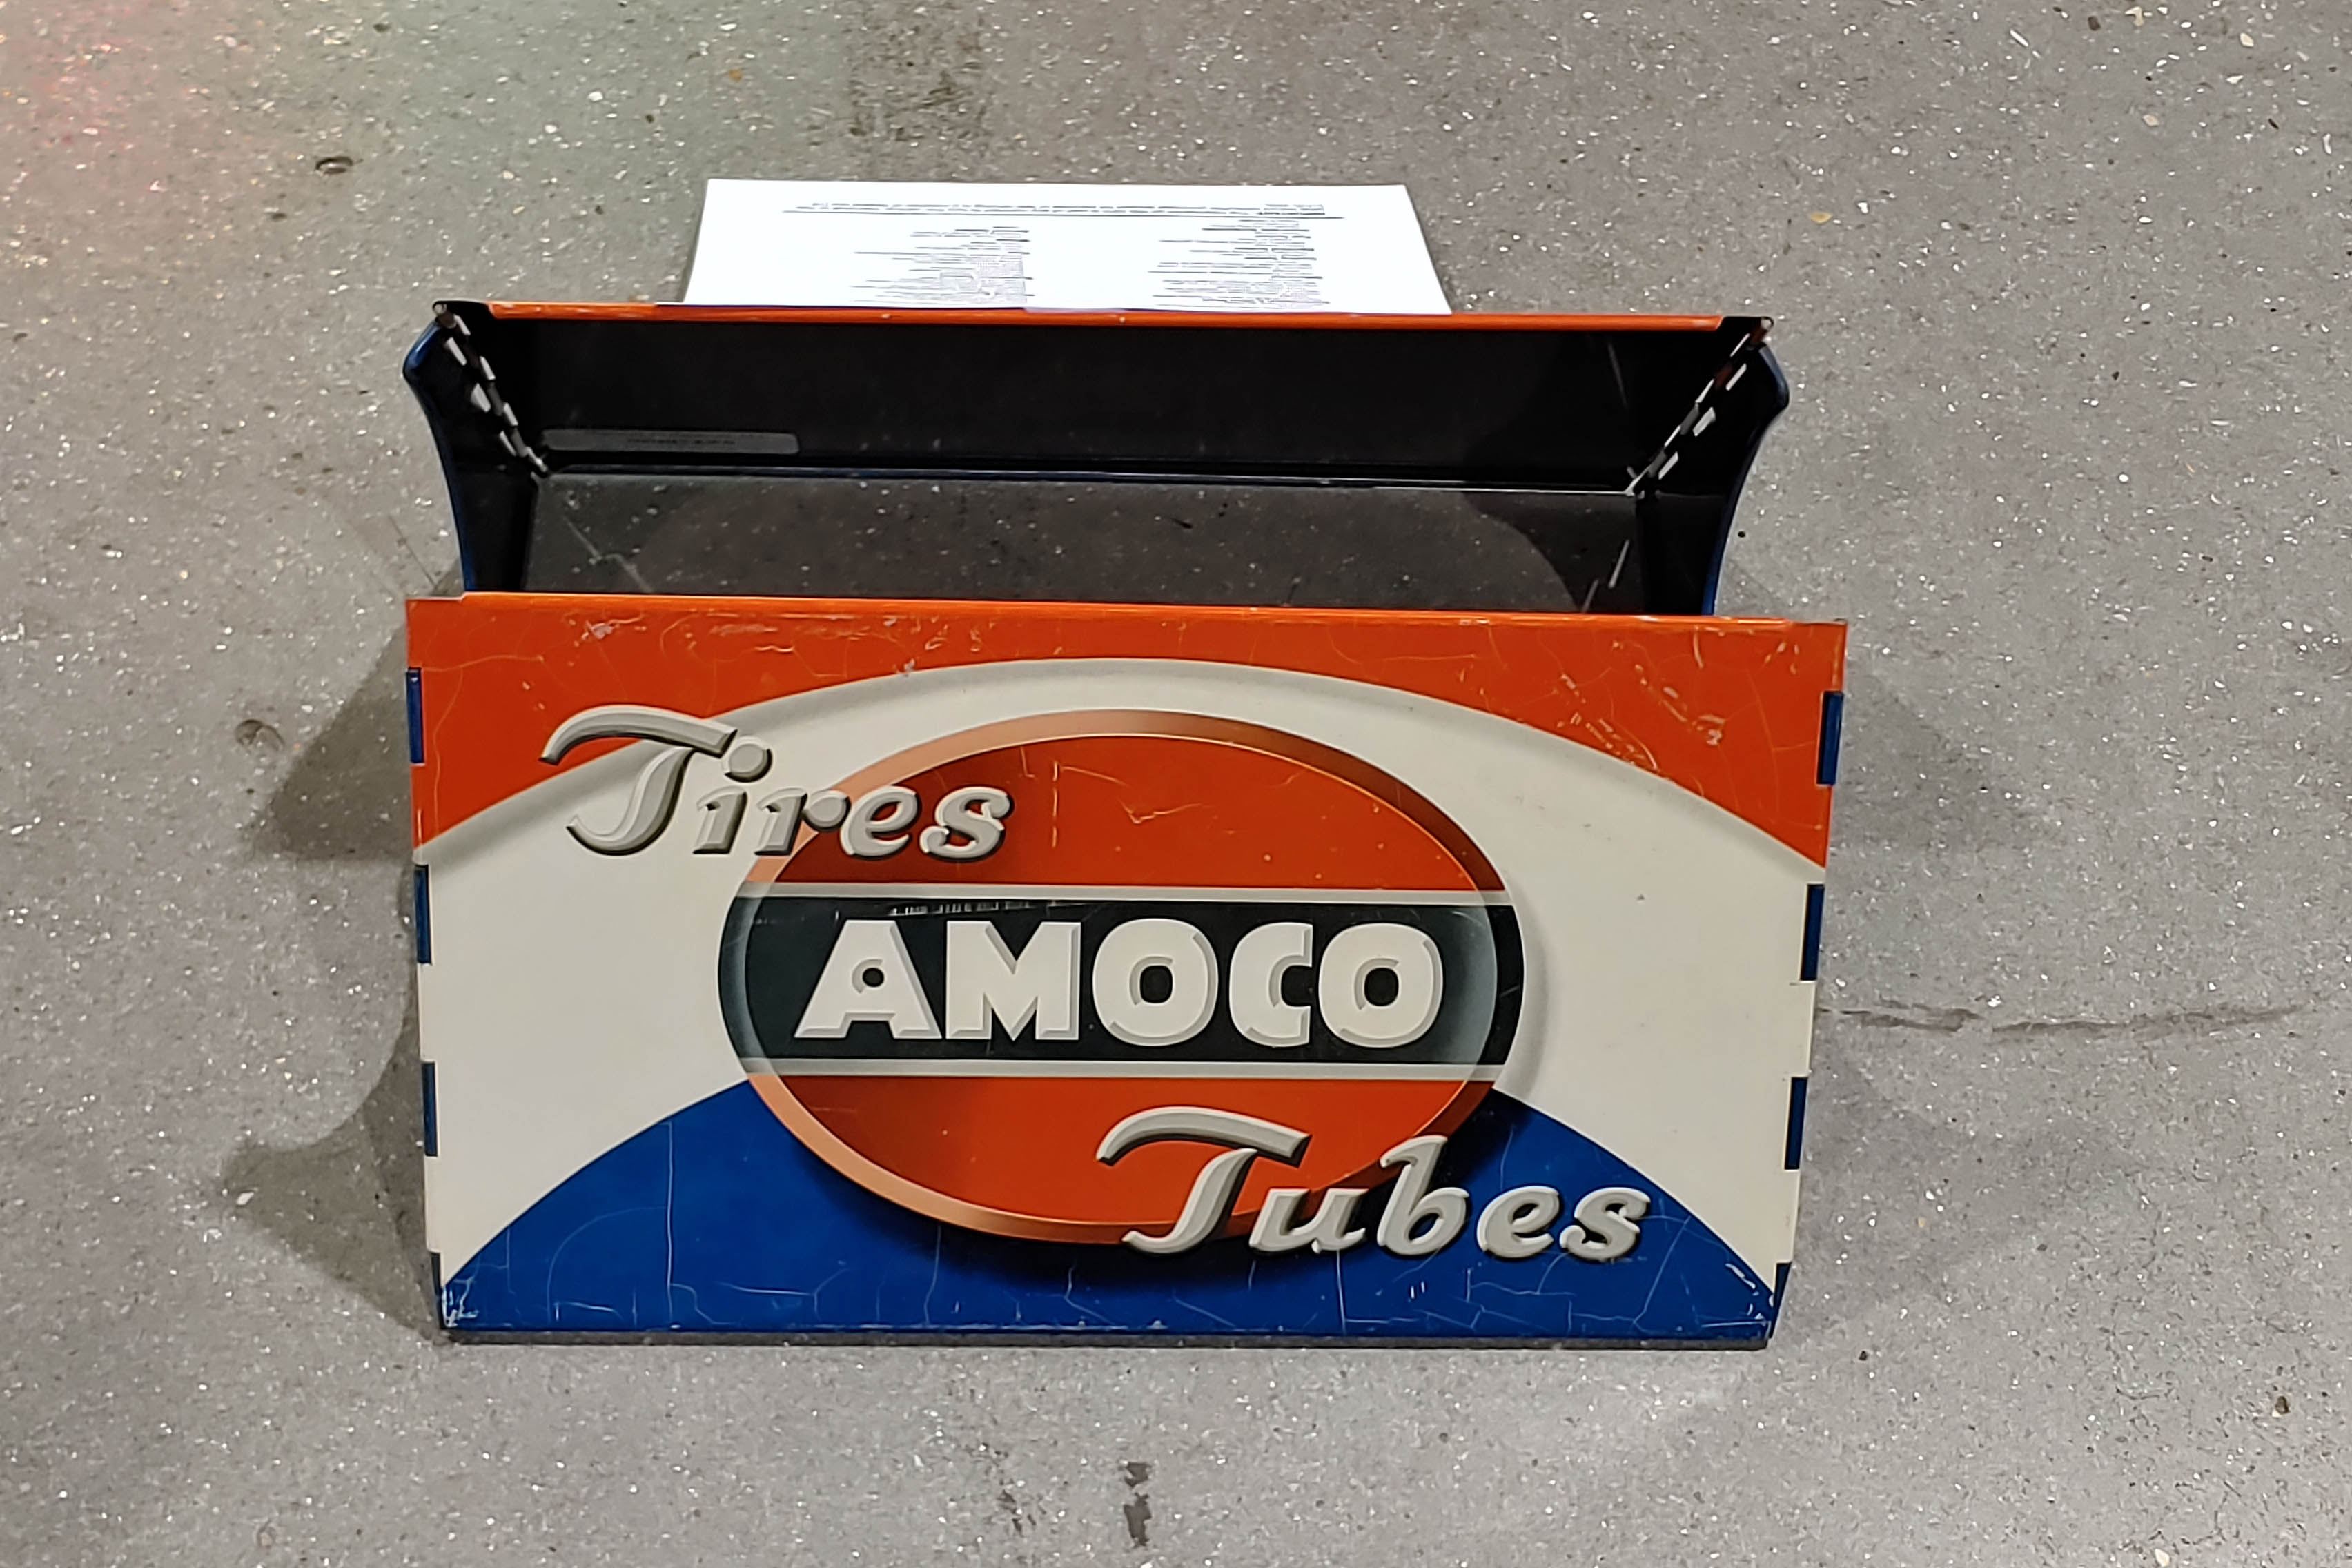 0th Image of a N/A AMOCO TUBES TIRE DISPLAY STAND